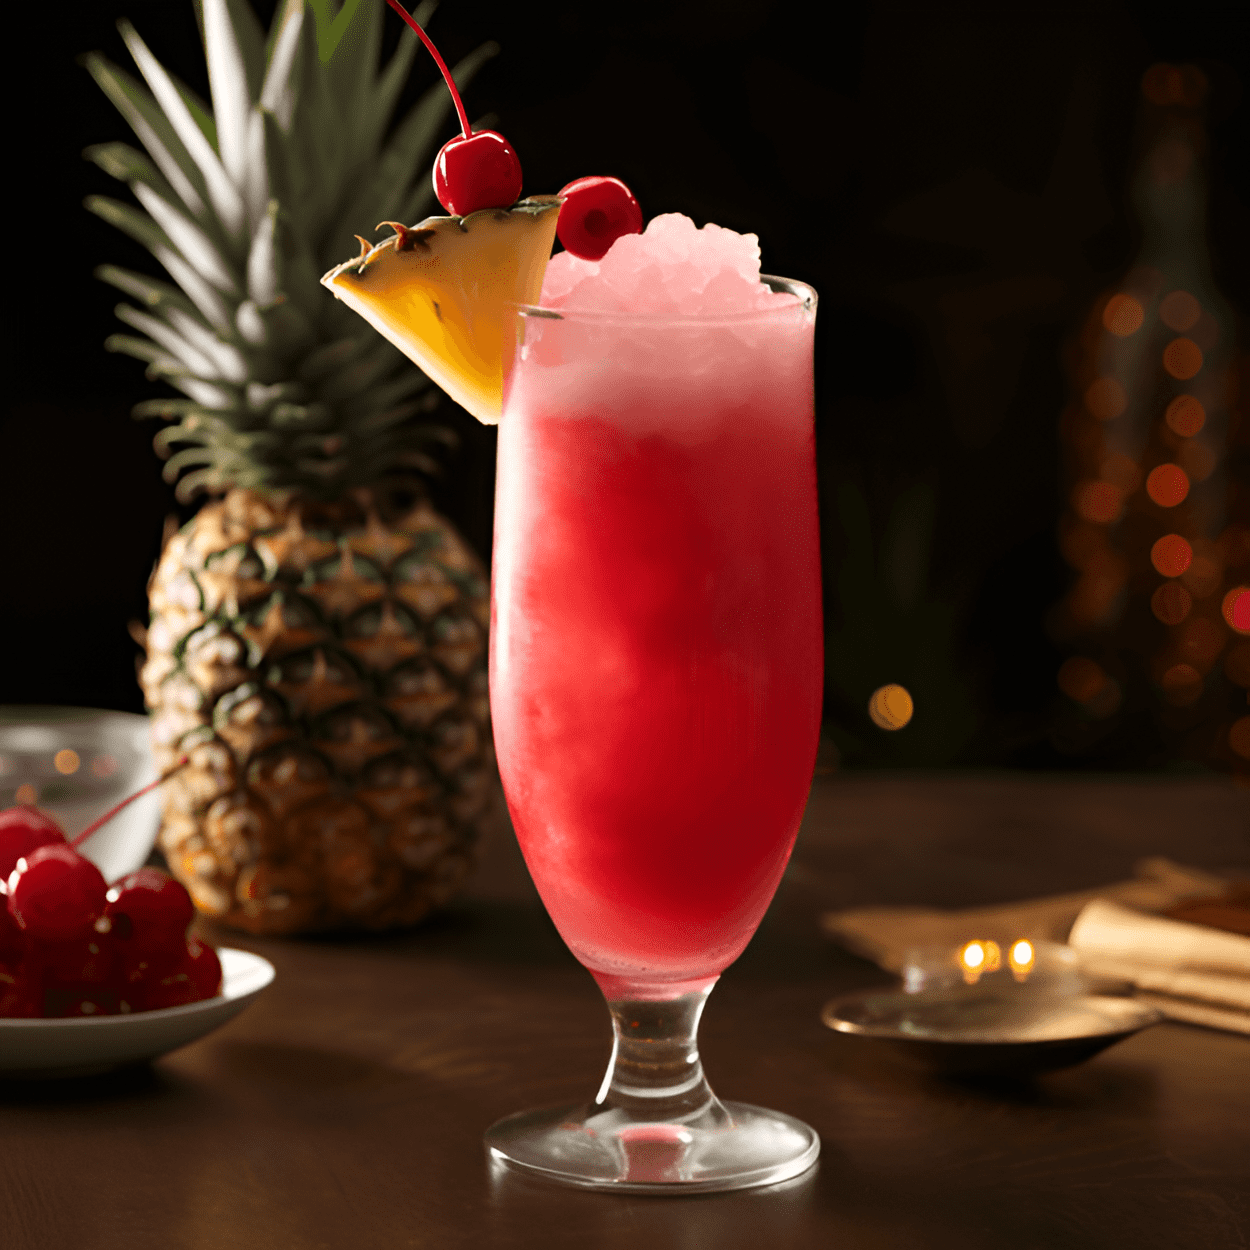 WAP Cocktail Recipe - The WAP cocktail is a delightful blend of sweet and sour, with a fruity undertone. The pineapple juice and peach schnapps give it a sweet, tropical flavor, while the vodka adds a strong, sharp kick. It's a refreshing, well-balanced cocktail that's sure to please.